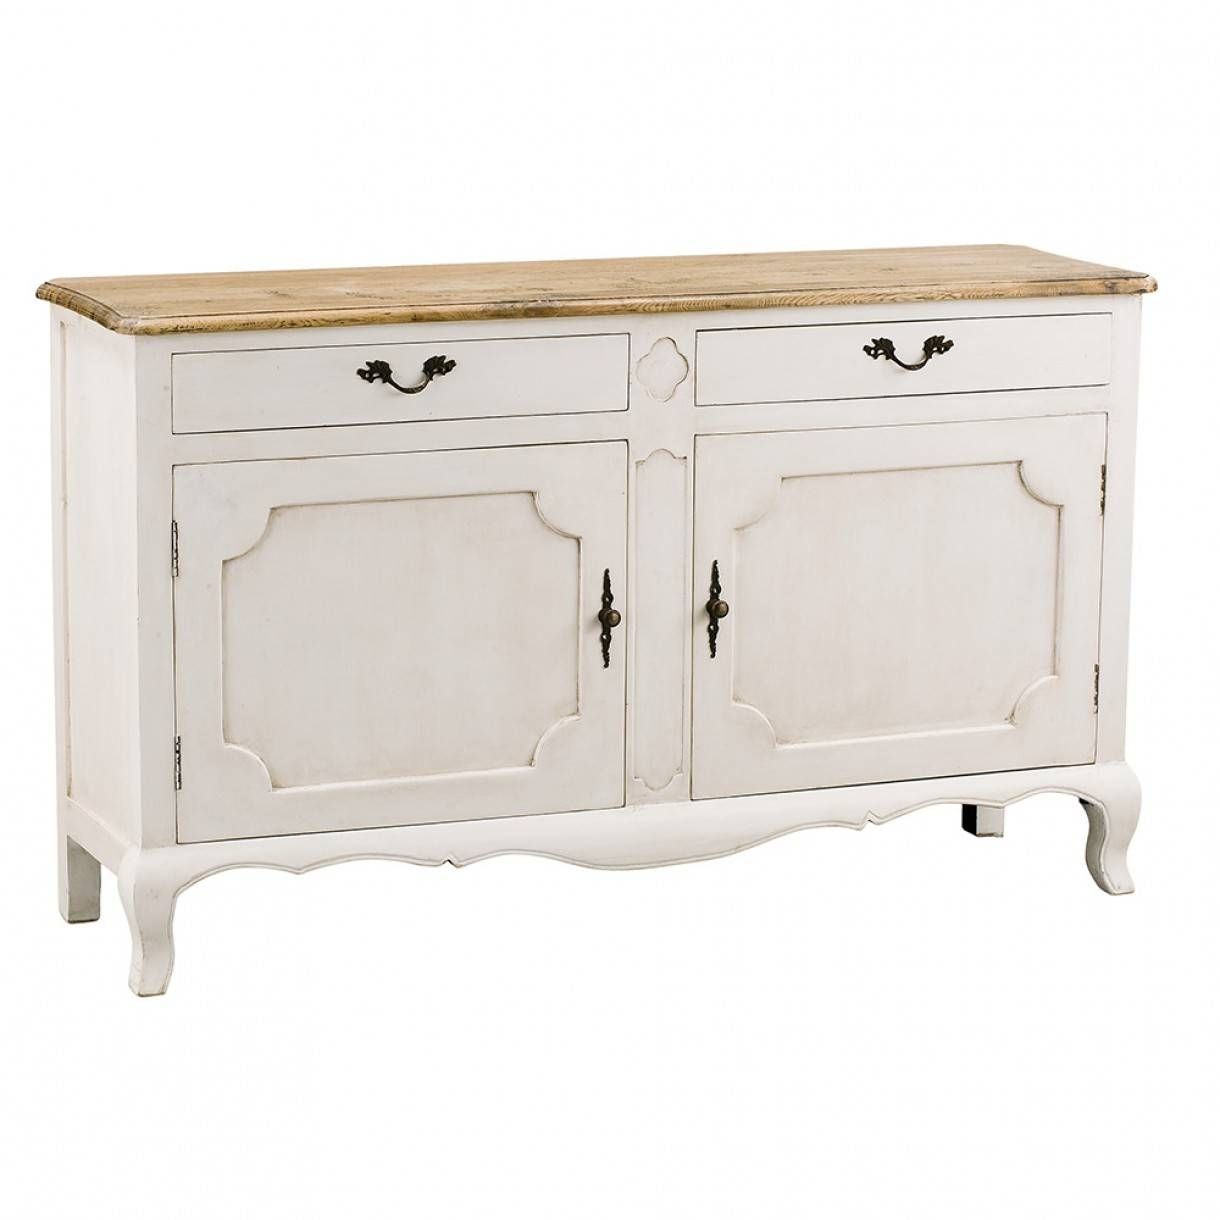 Oak Sideboard Distressed White In Distressed Sideboards (View 9 of 15)